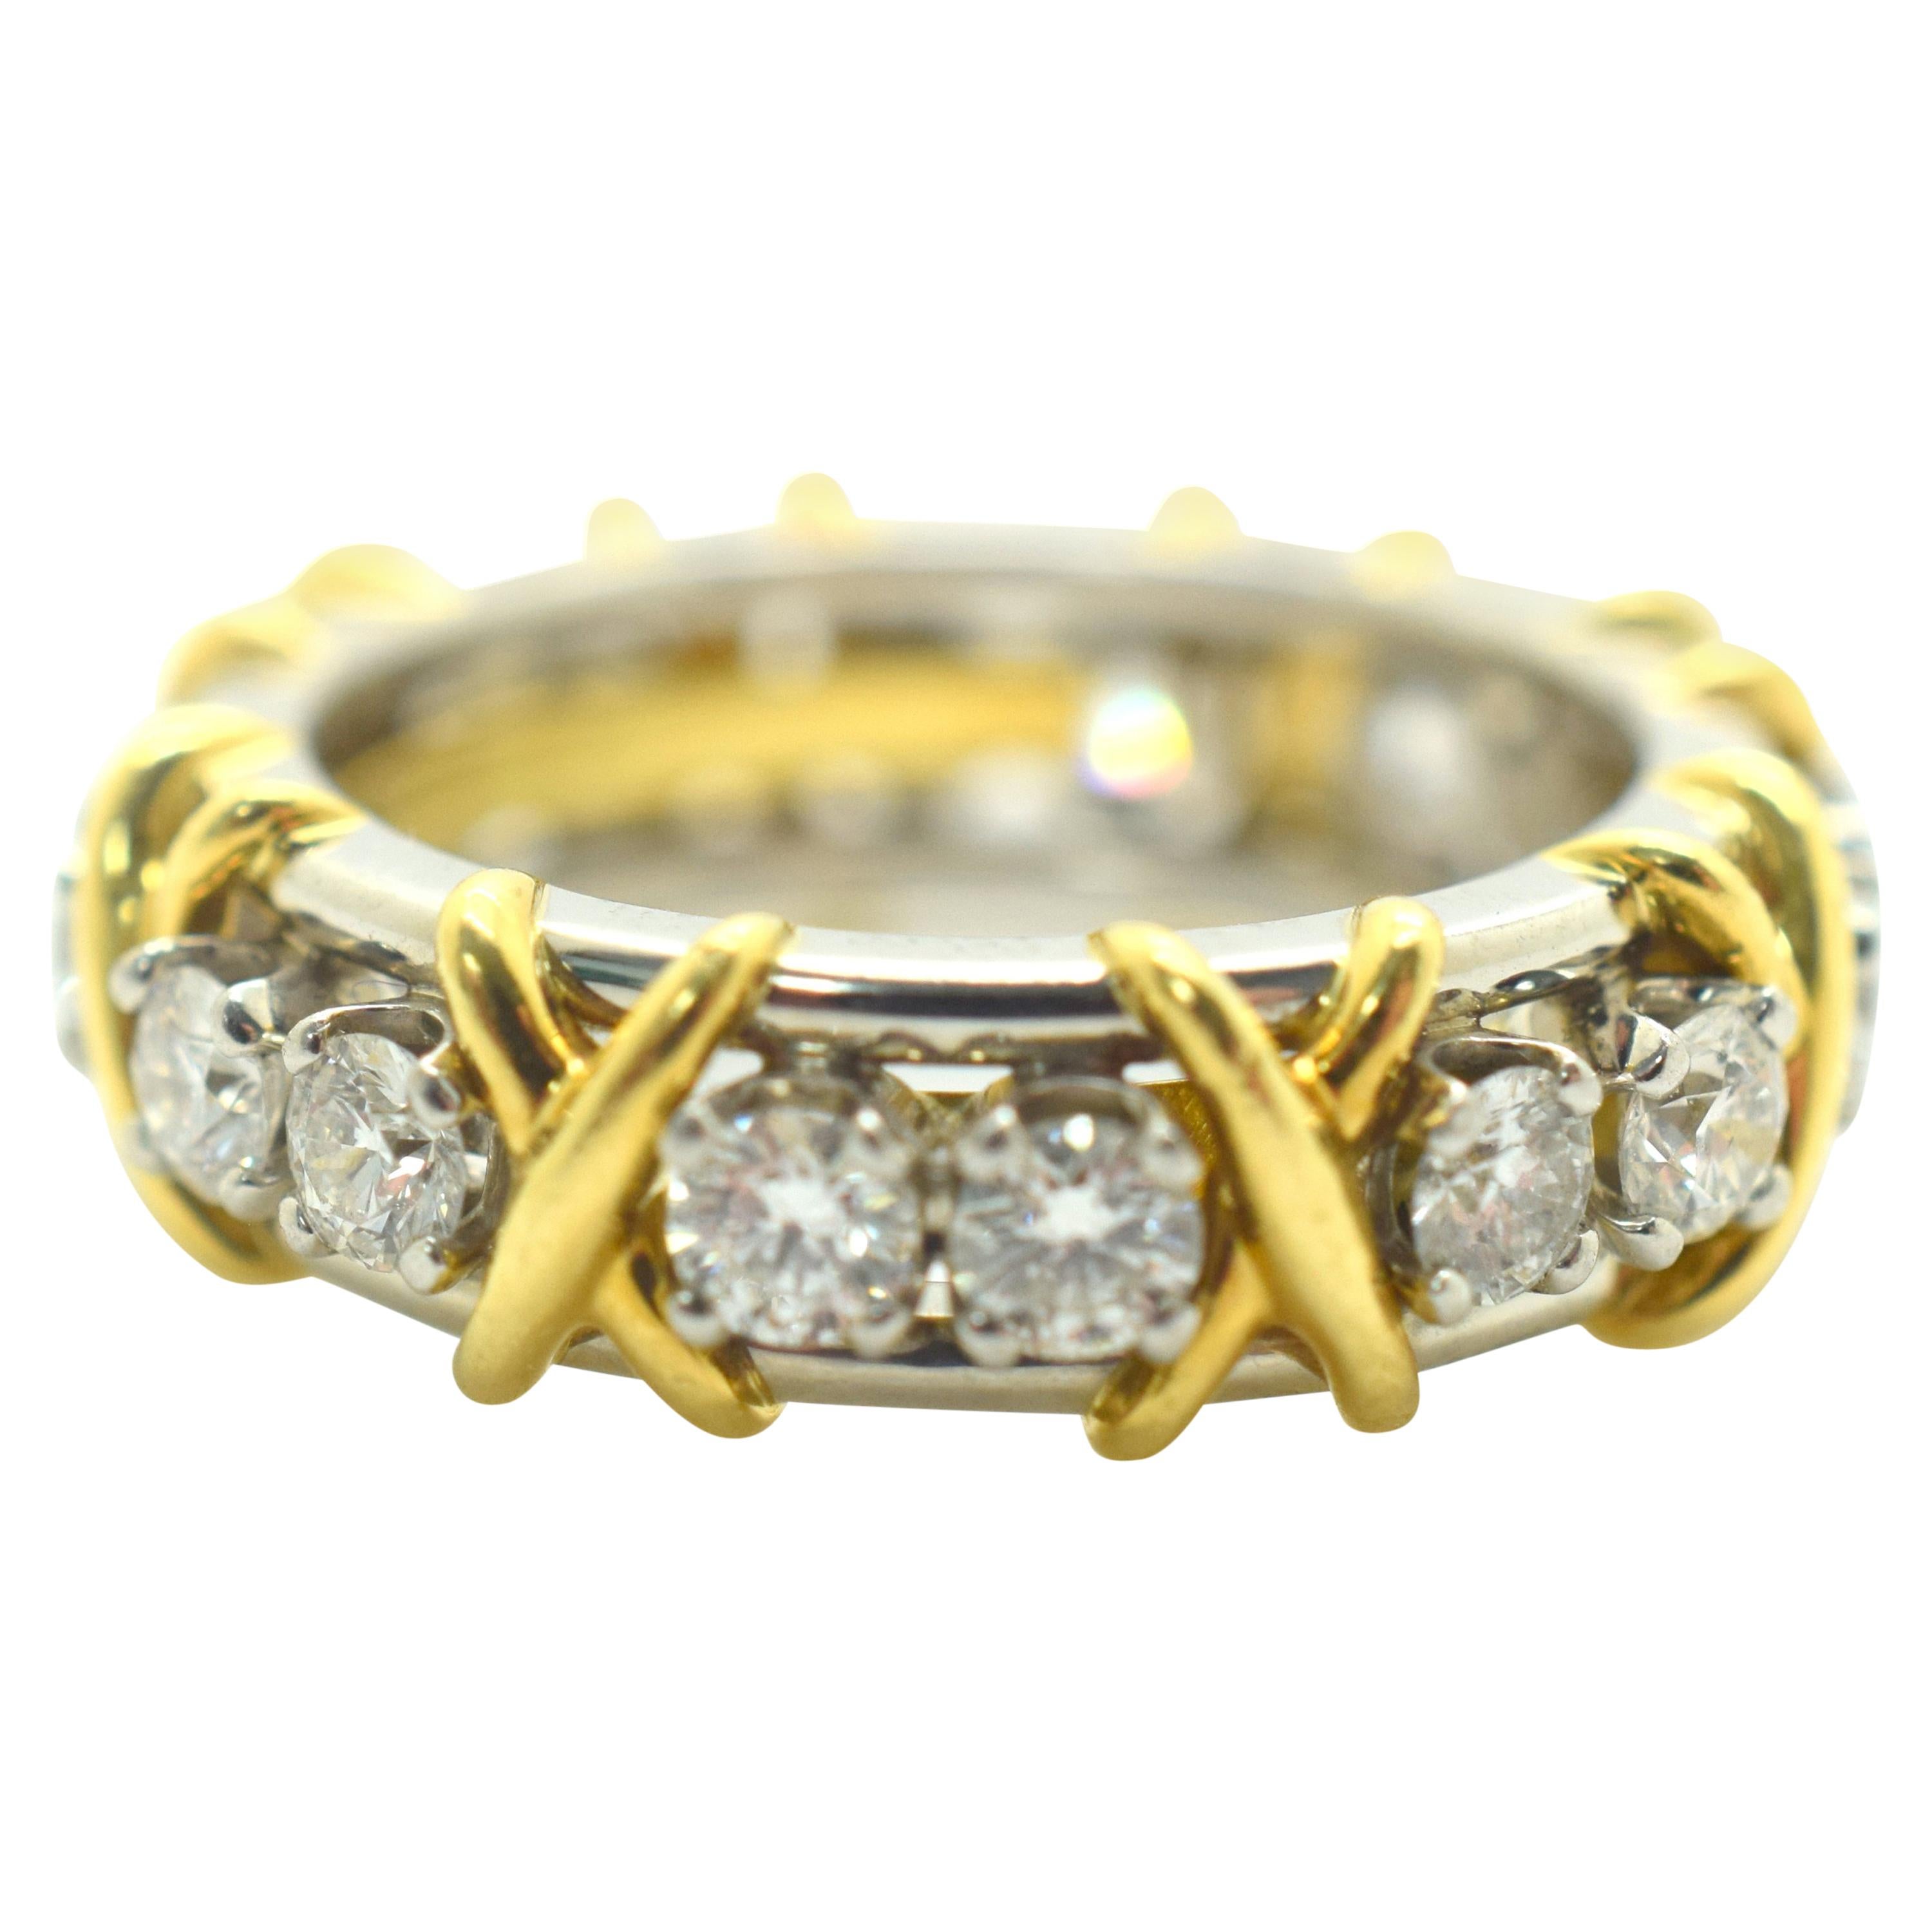 Tiffany & Co. Schlumberger 16-Stone Diamond Ring in Platinum and Gold